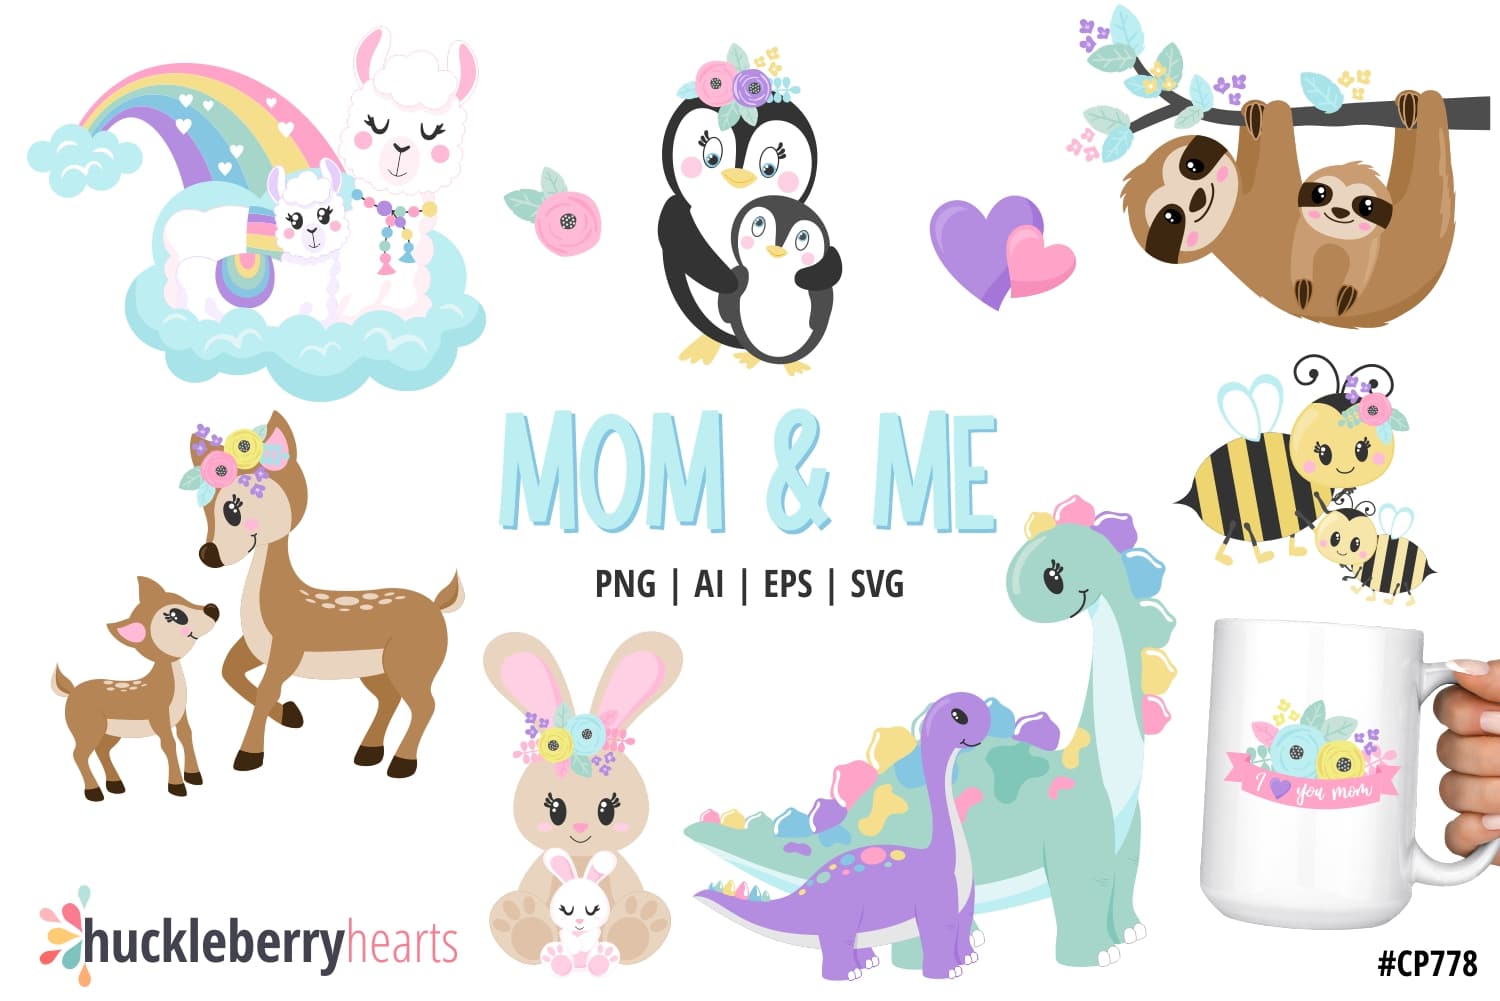 Assorted Mom and Me Clipart and Vectors